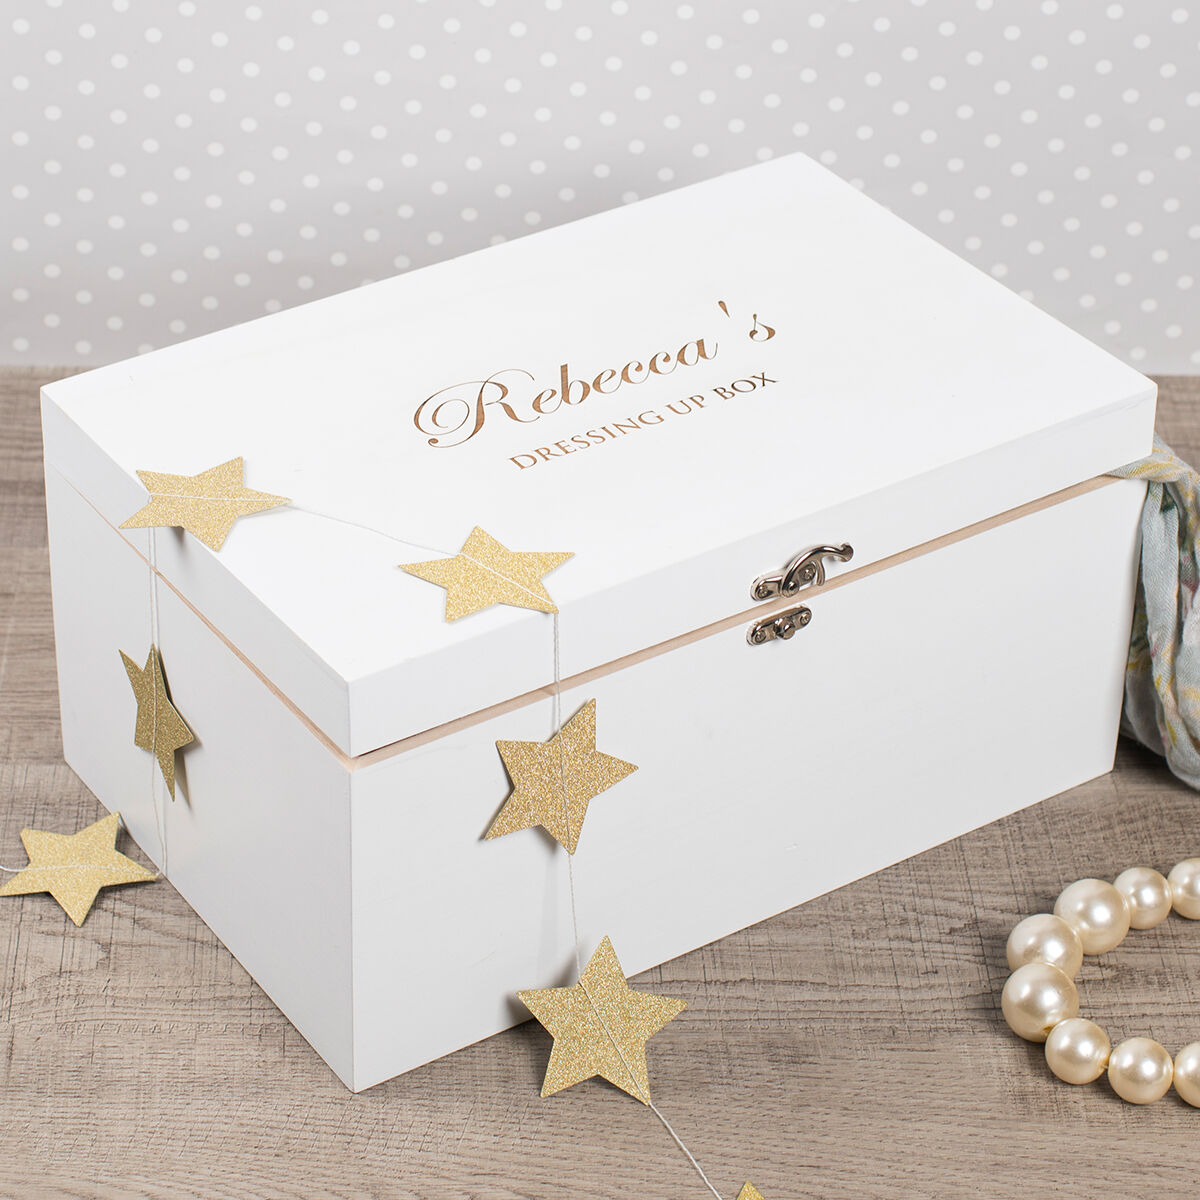 Personalised Wooden Keepsake Box for Girls and Boys - Personalised Gifts  for Children - Baby Name Gifts : Amazon.co.uk: Handmade Products